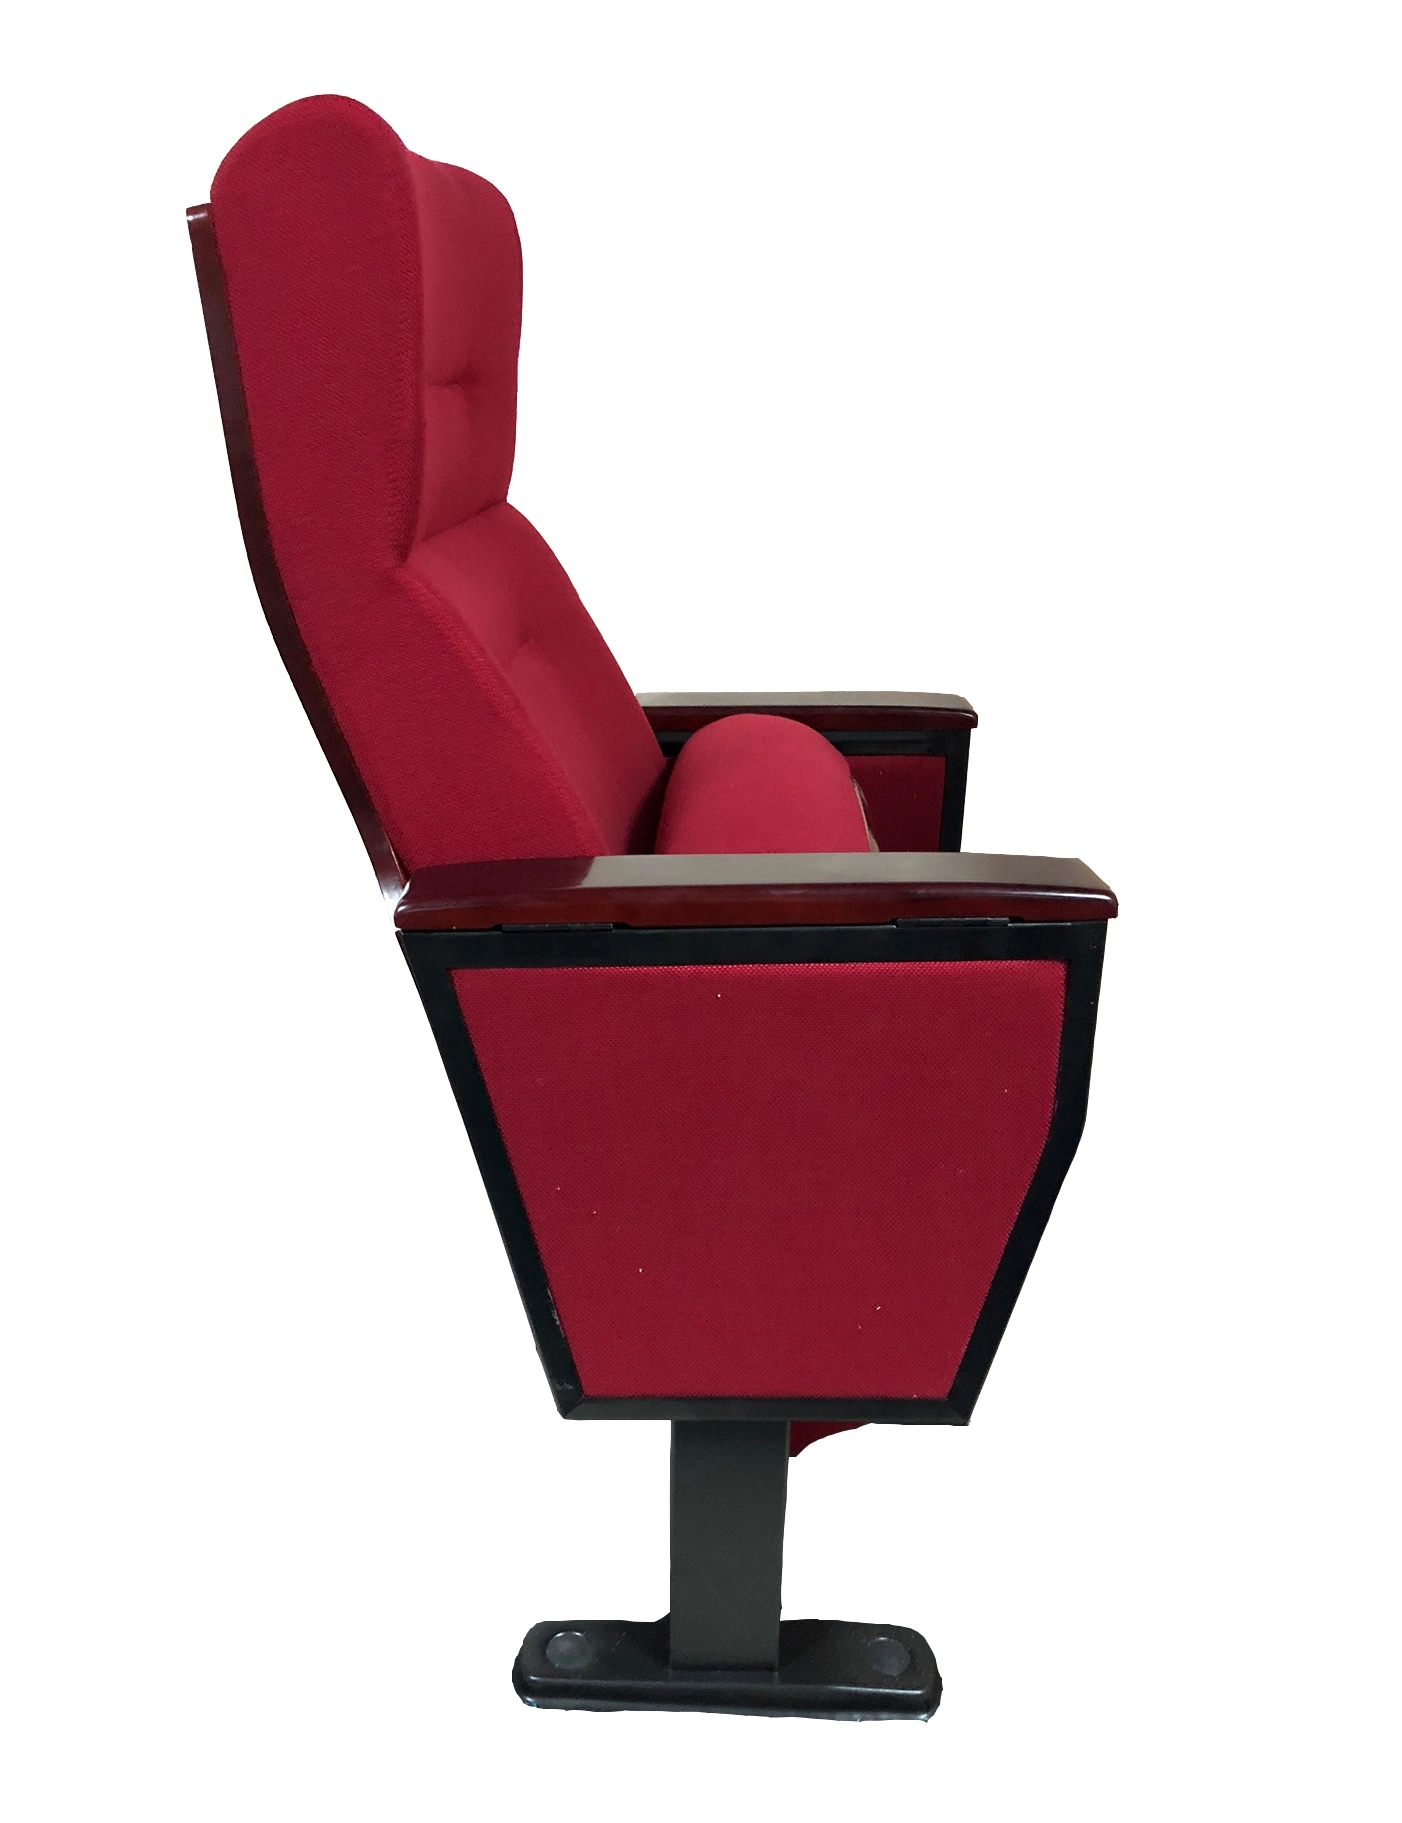 Commercial Theater Seat Auditorium Seat Furniture with Cup